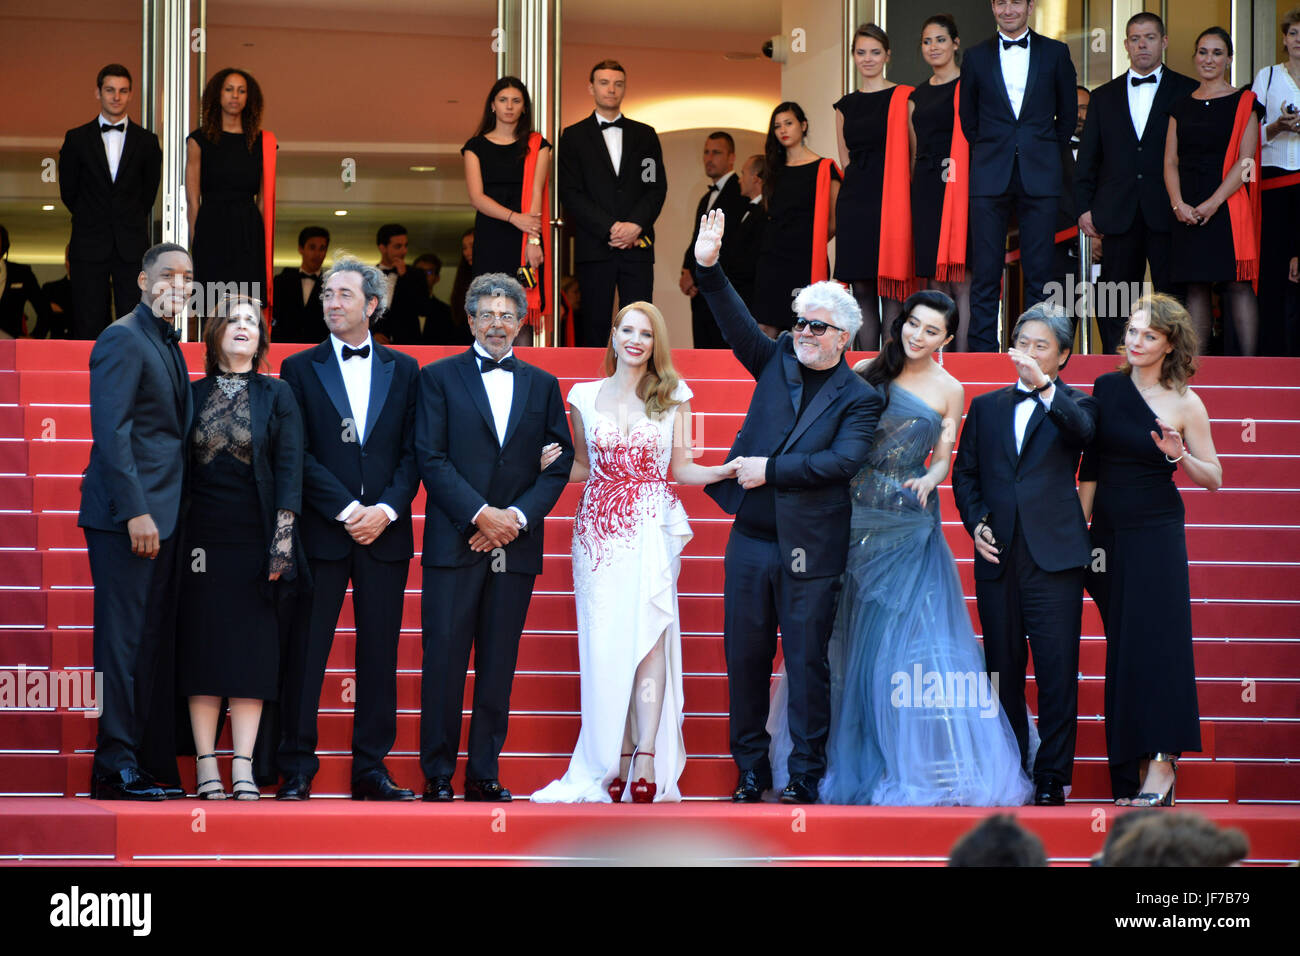 Closing Ceremony of the 70th annual Cannes Film Festival at the Palais des Festivals in Cannes, France.  Featuring: Will Smith, Agnes Jaoui, Paolo Sorrentino, Gabriel Yared, Jessica Chastain, Pedro Almodovar, David Lisnard, Fan Bingbing, Park Chan-wook, Maren Ade Where: Cannes, France When: 28 May 2017 Credit: IPA/WENN.com  **Only available for publication in UK, USA, Germany, Austria, Switzerland** Stock Photo